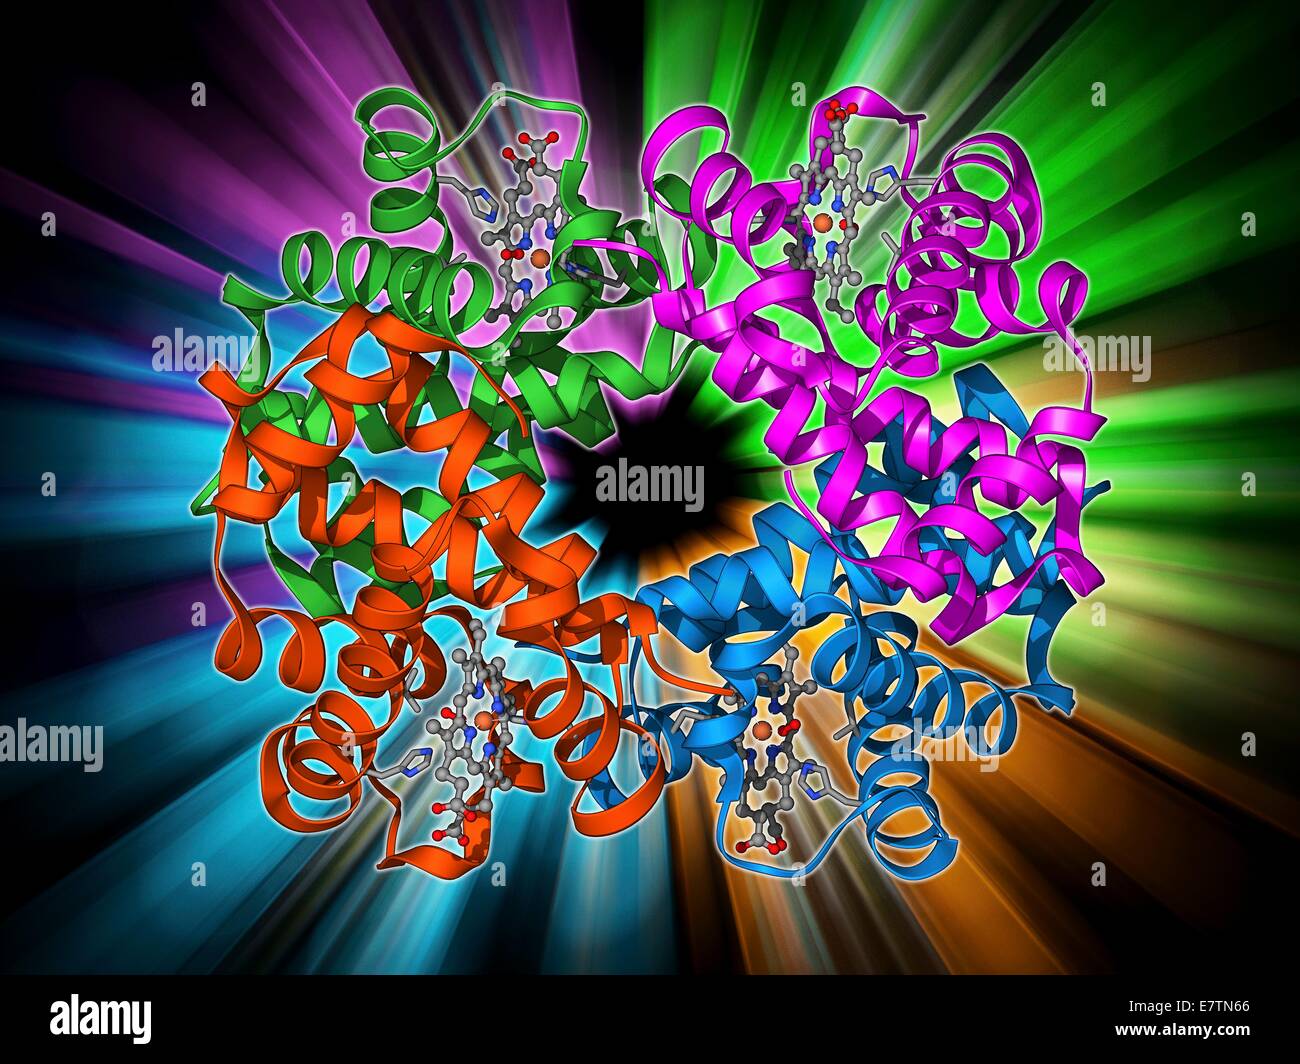 Haemoglobin, molecular model. Haemoglobin is a metalloprotein that transports oxygen around the body in red blood cells. Each molecule consists of iron-containing haem groups (sticks) and globin proteins (amino acid chains, coils). Each globin protein is Stock Photo